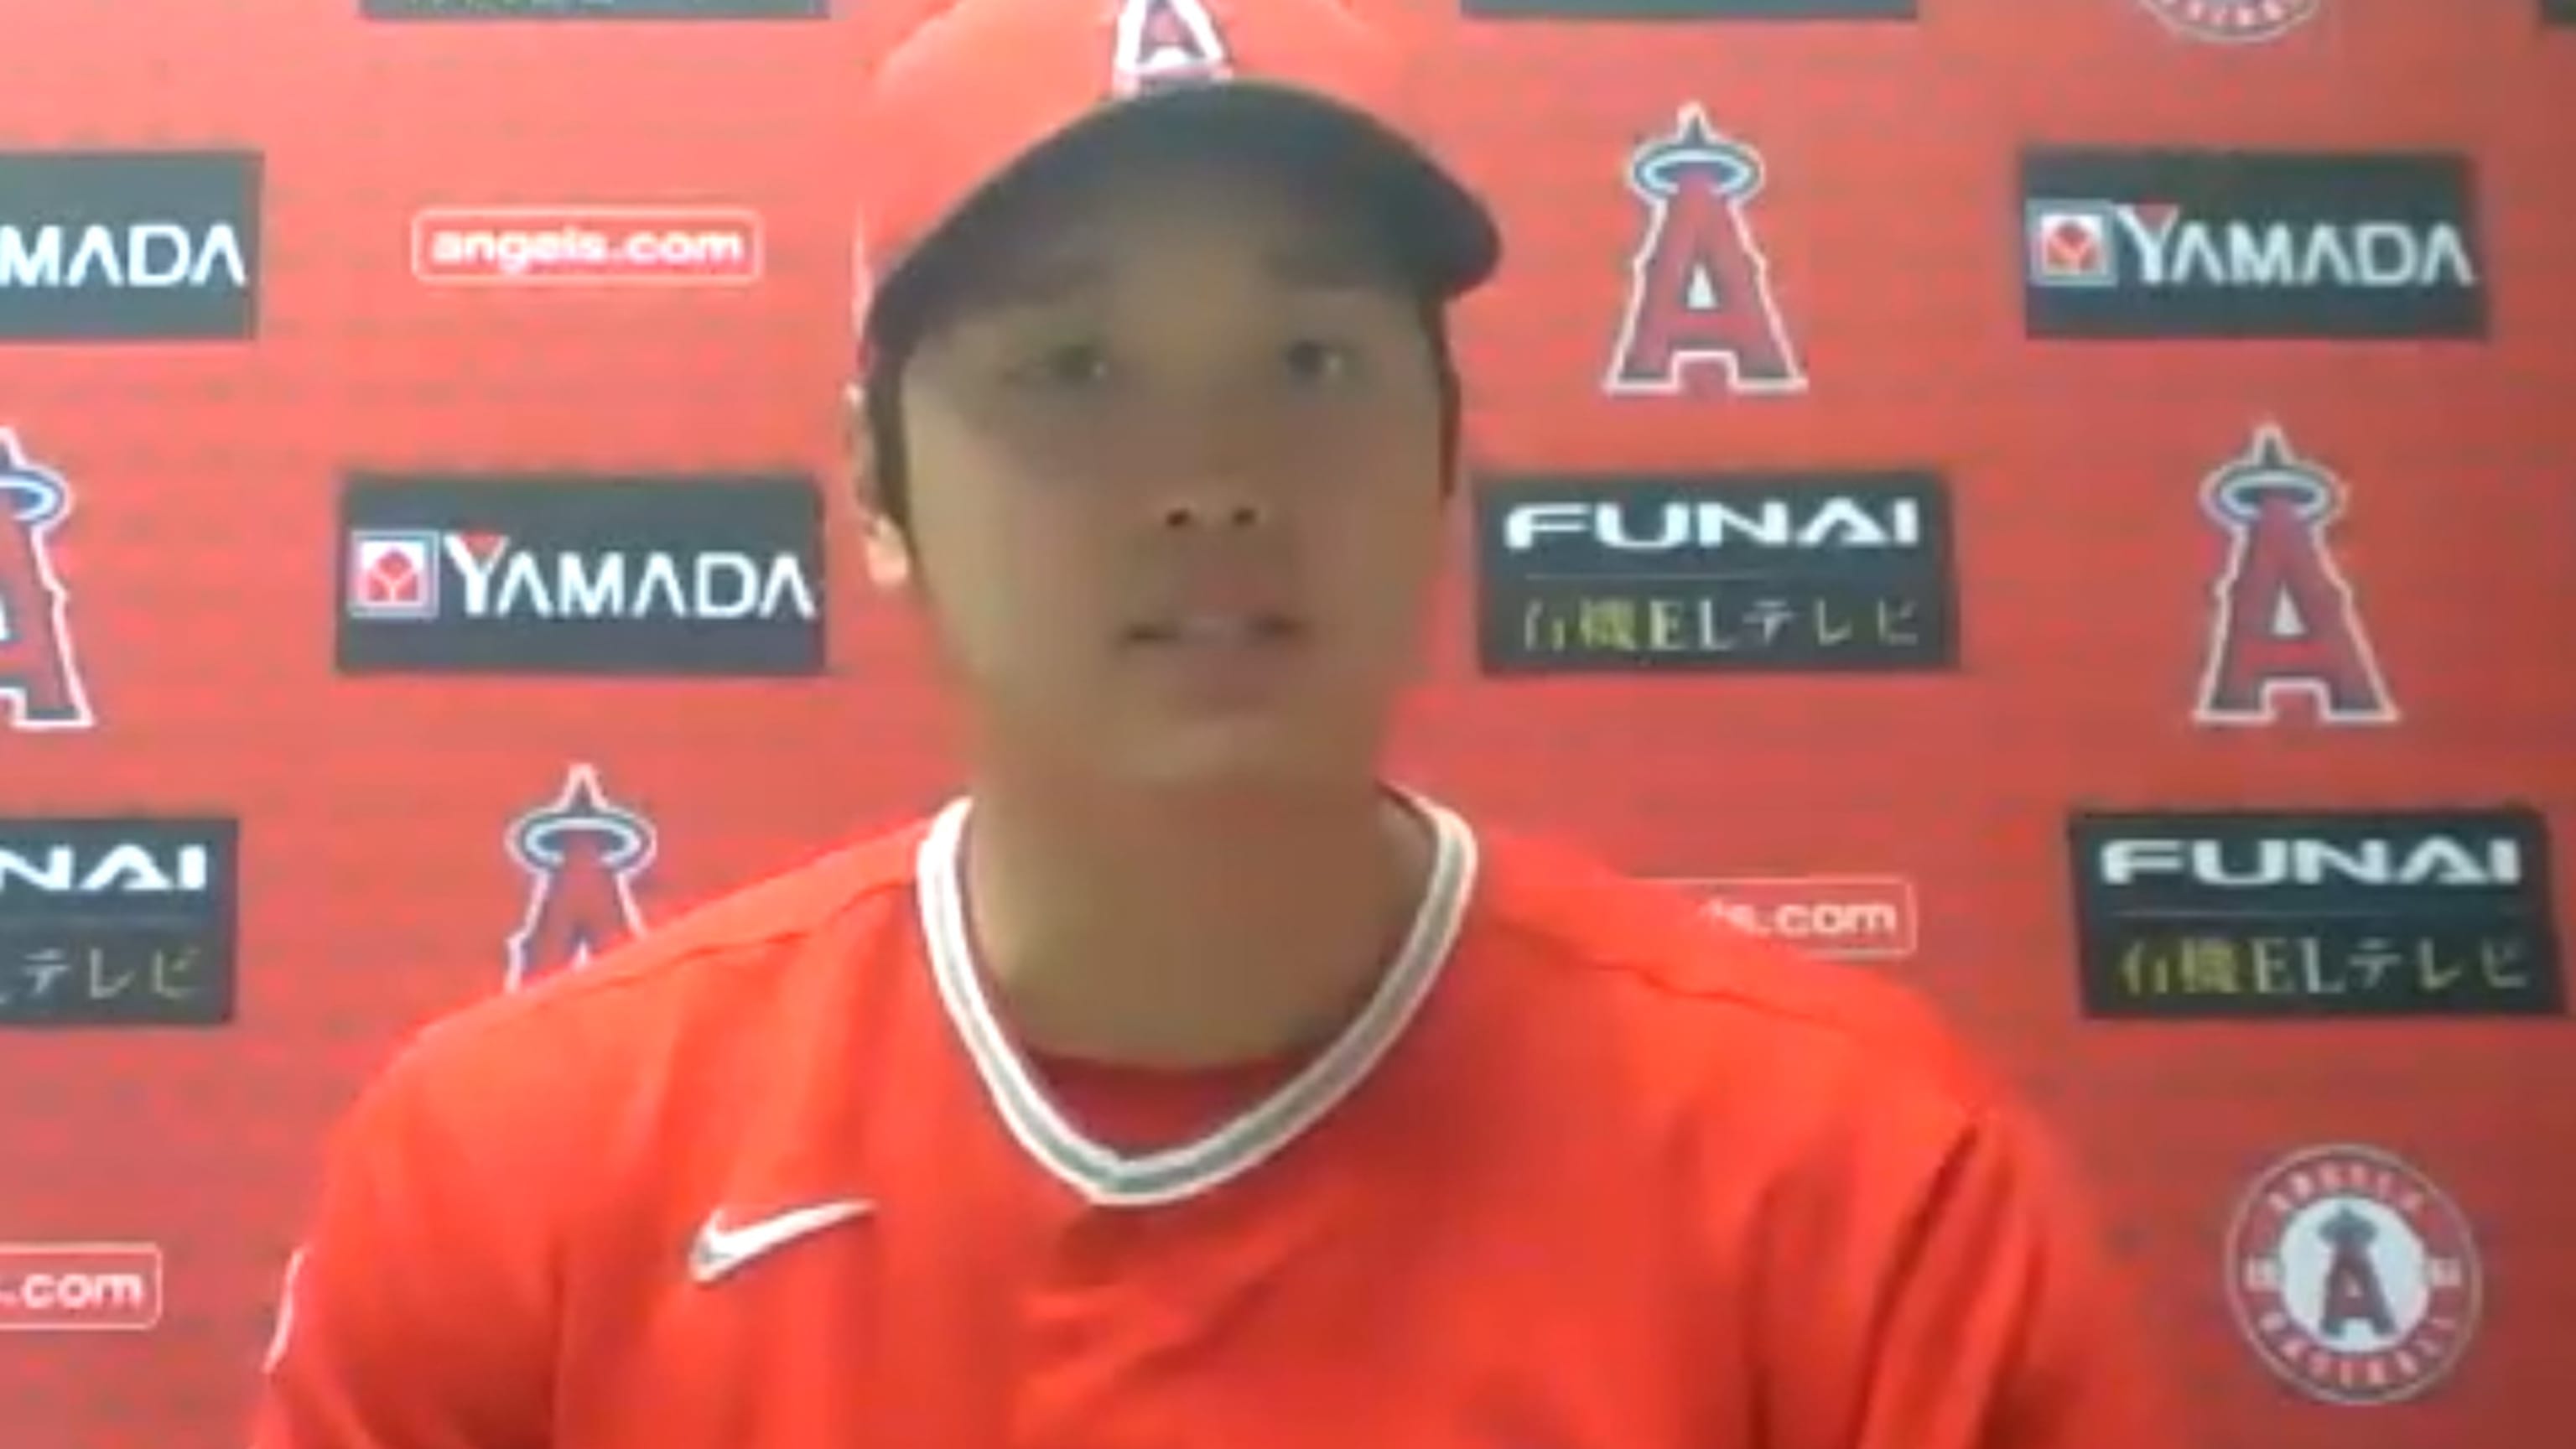 Shohei Ohtani piles up strikeouts in spring debut